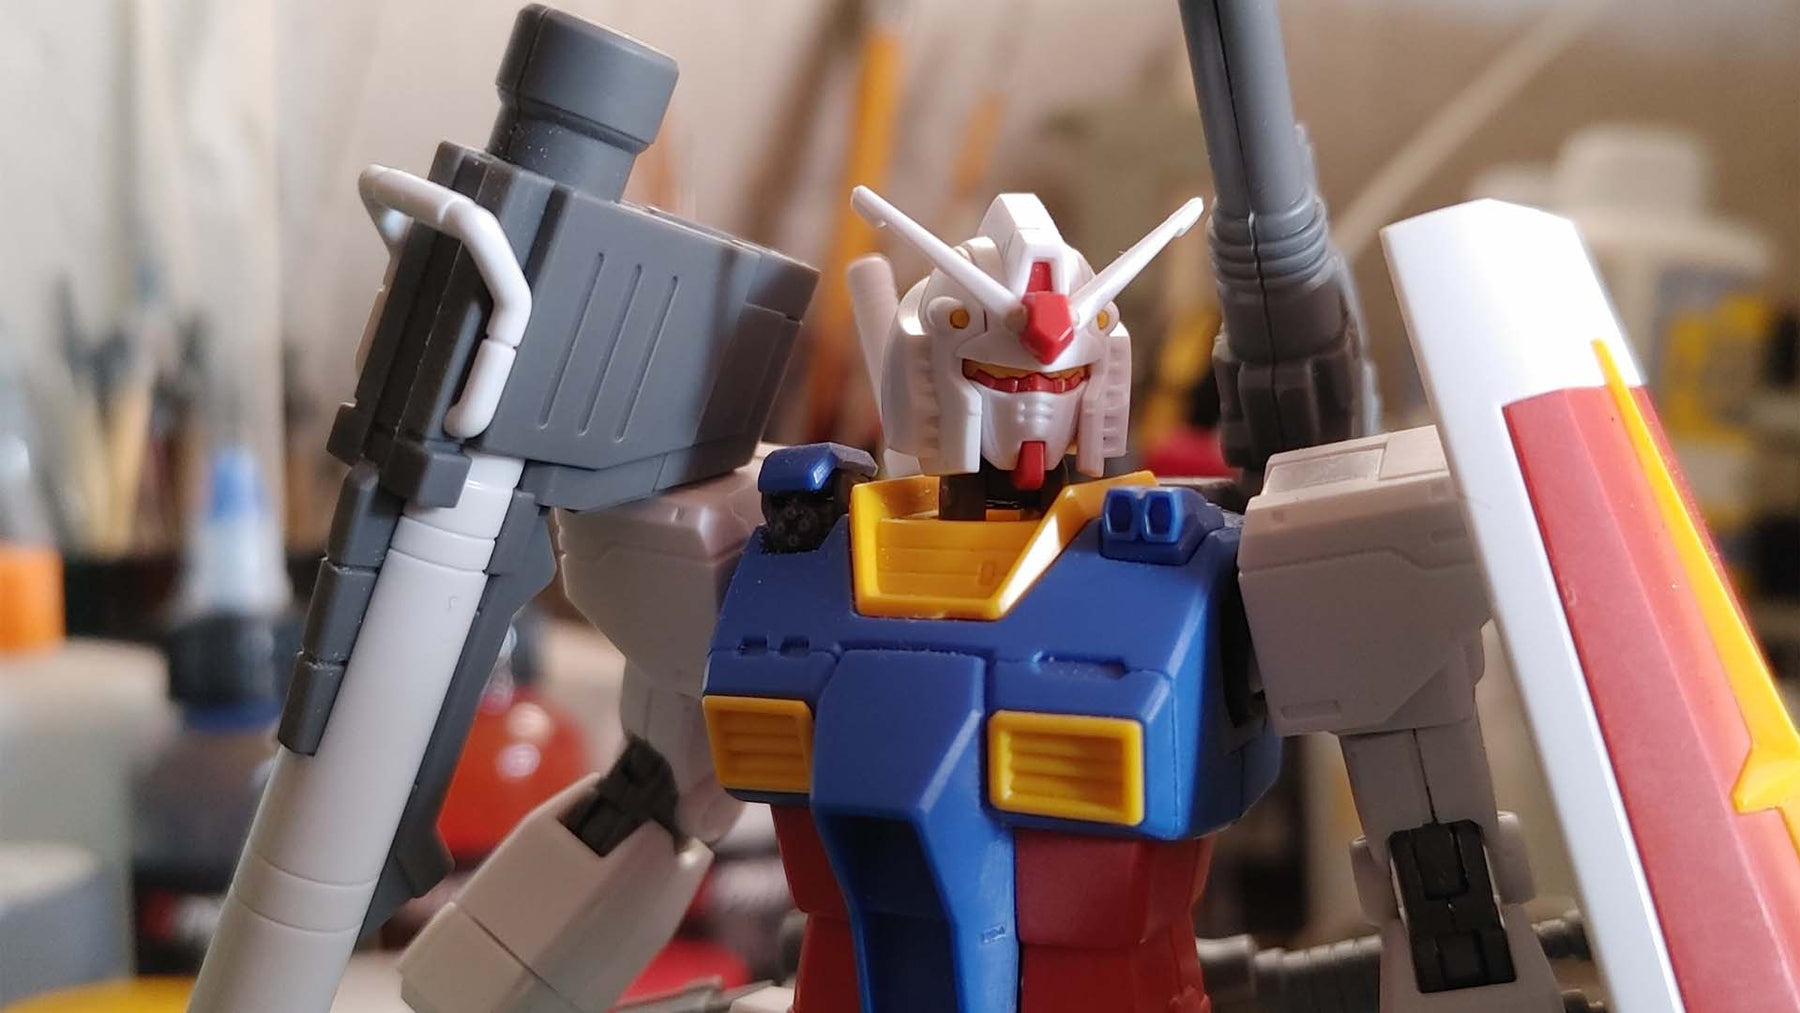 An introduction to the basics of building GUNPLA with some quick tips.